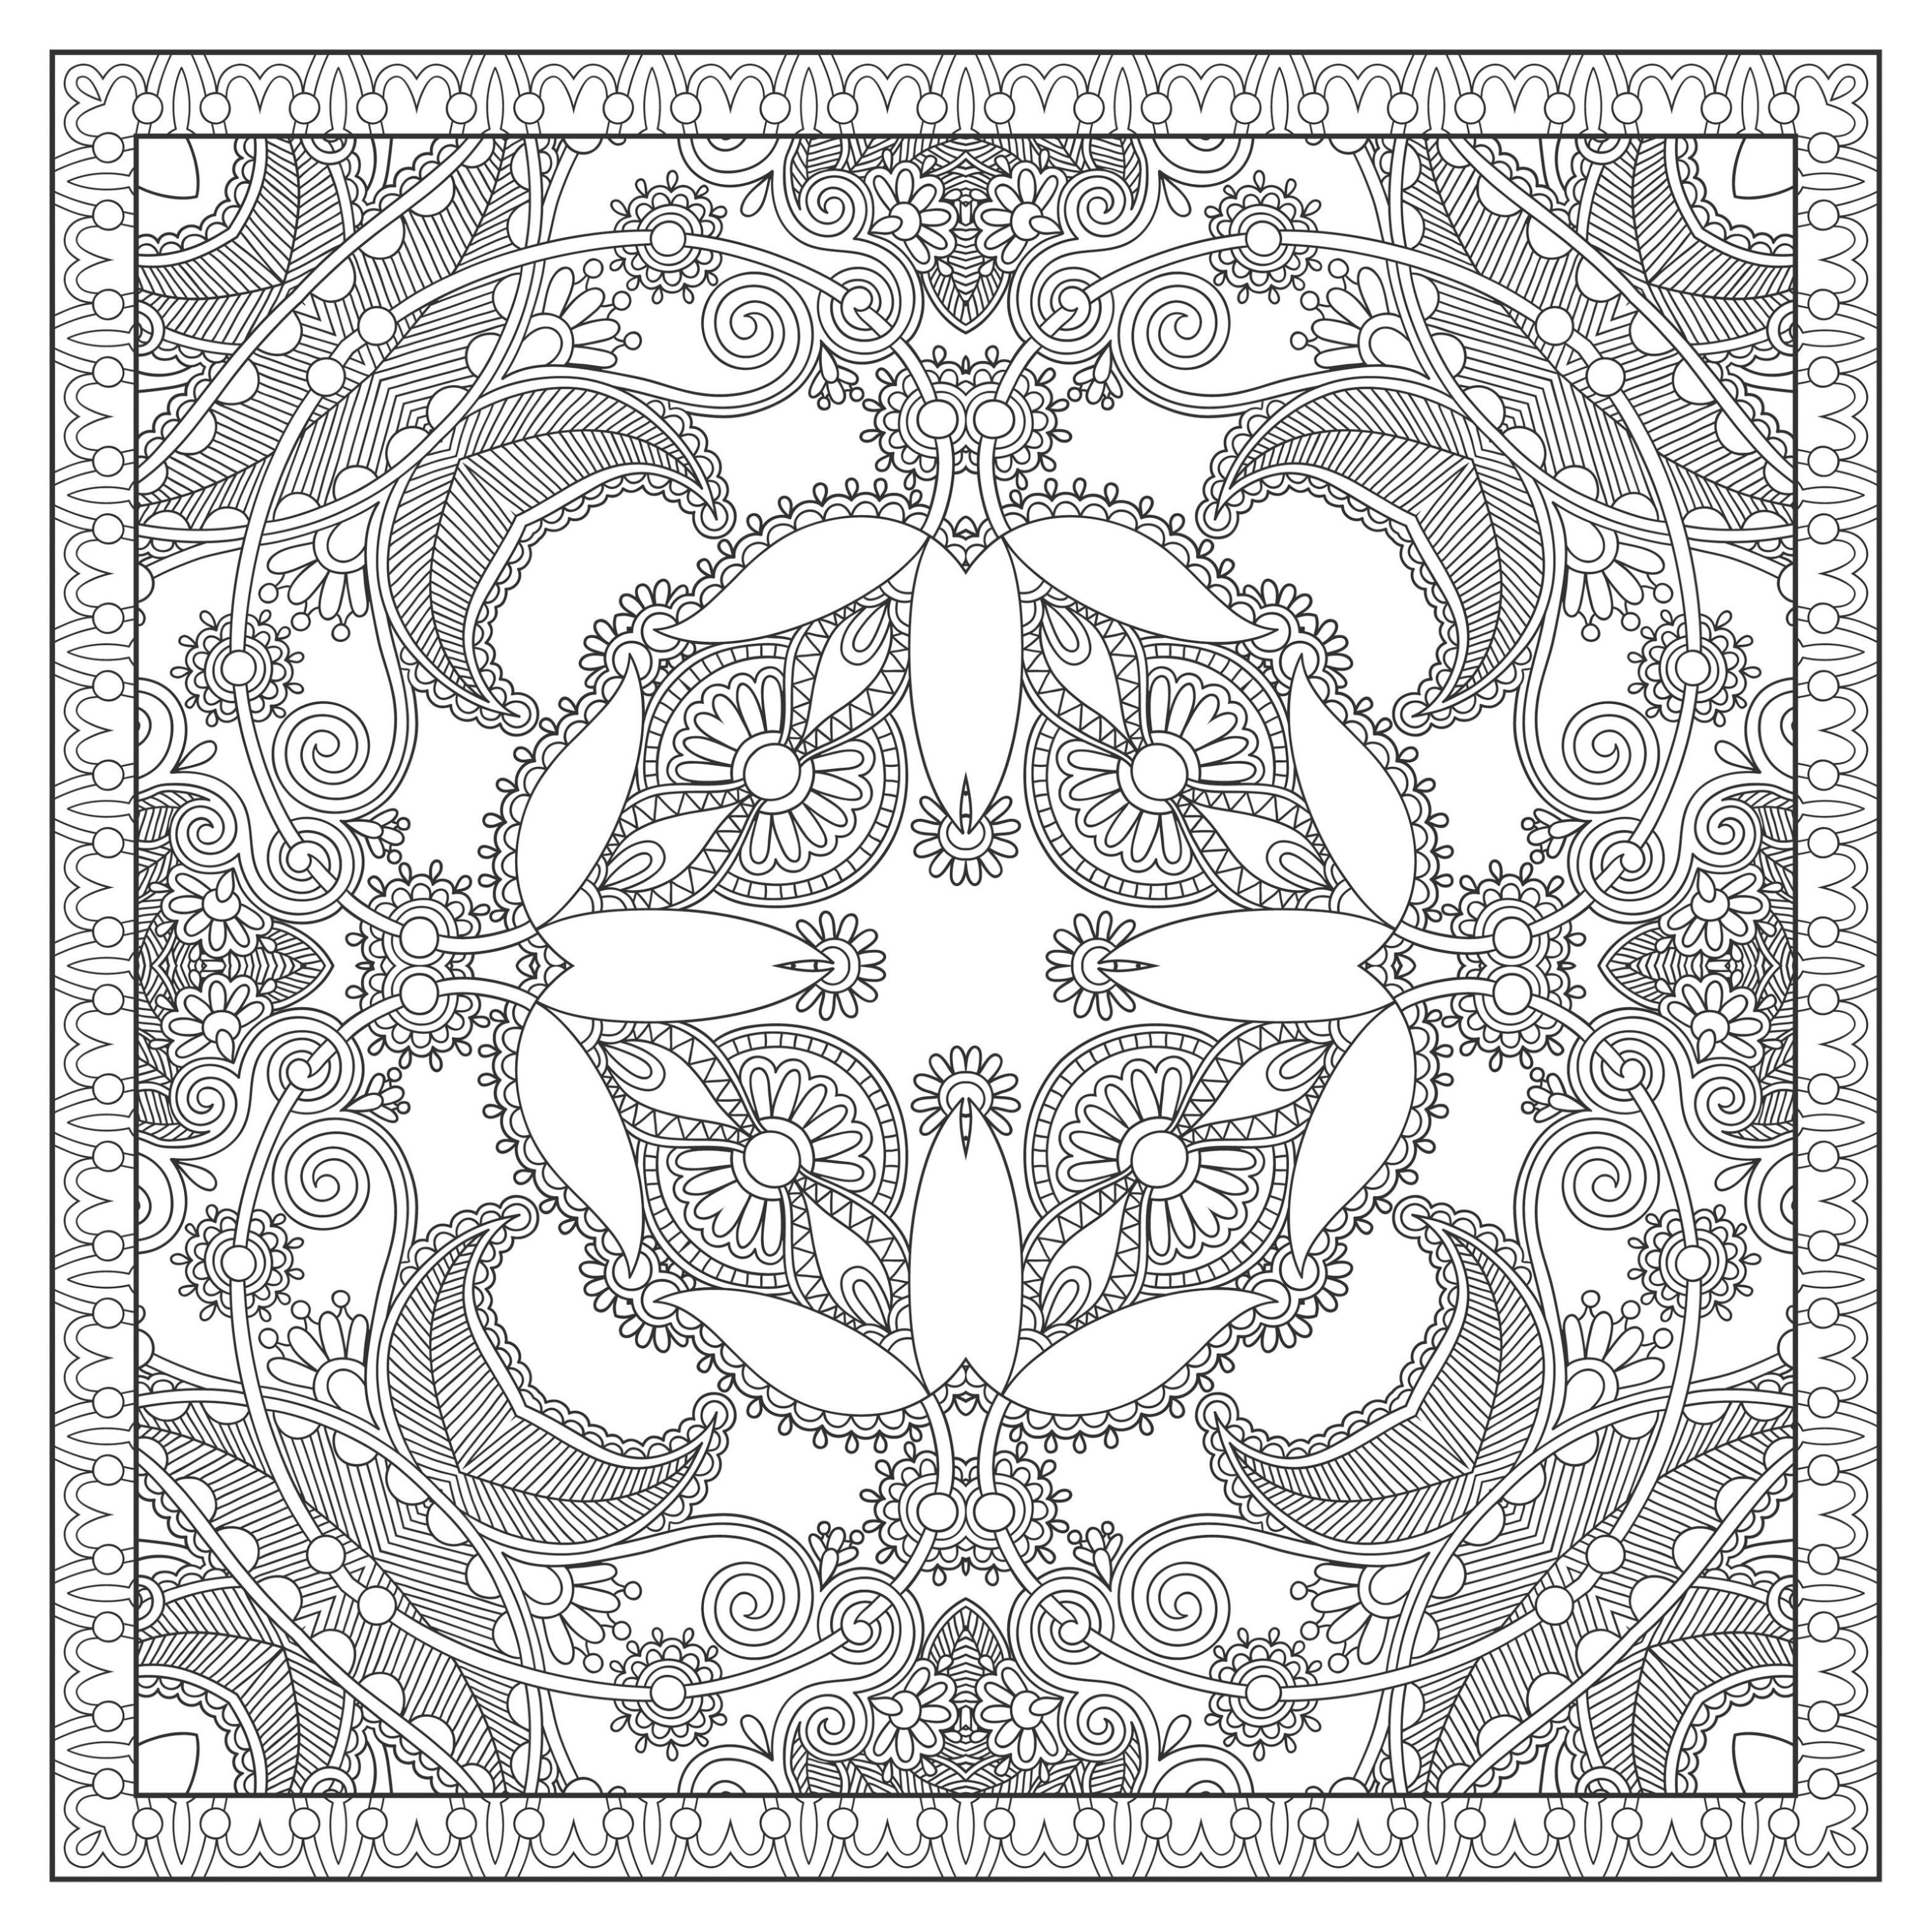 Complex Square Mandala drawing by Karakotsya. Prepare your pens and pencils ! This Mandala needs to be very meticulous, precise and picky, to get a good quality result.